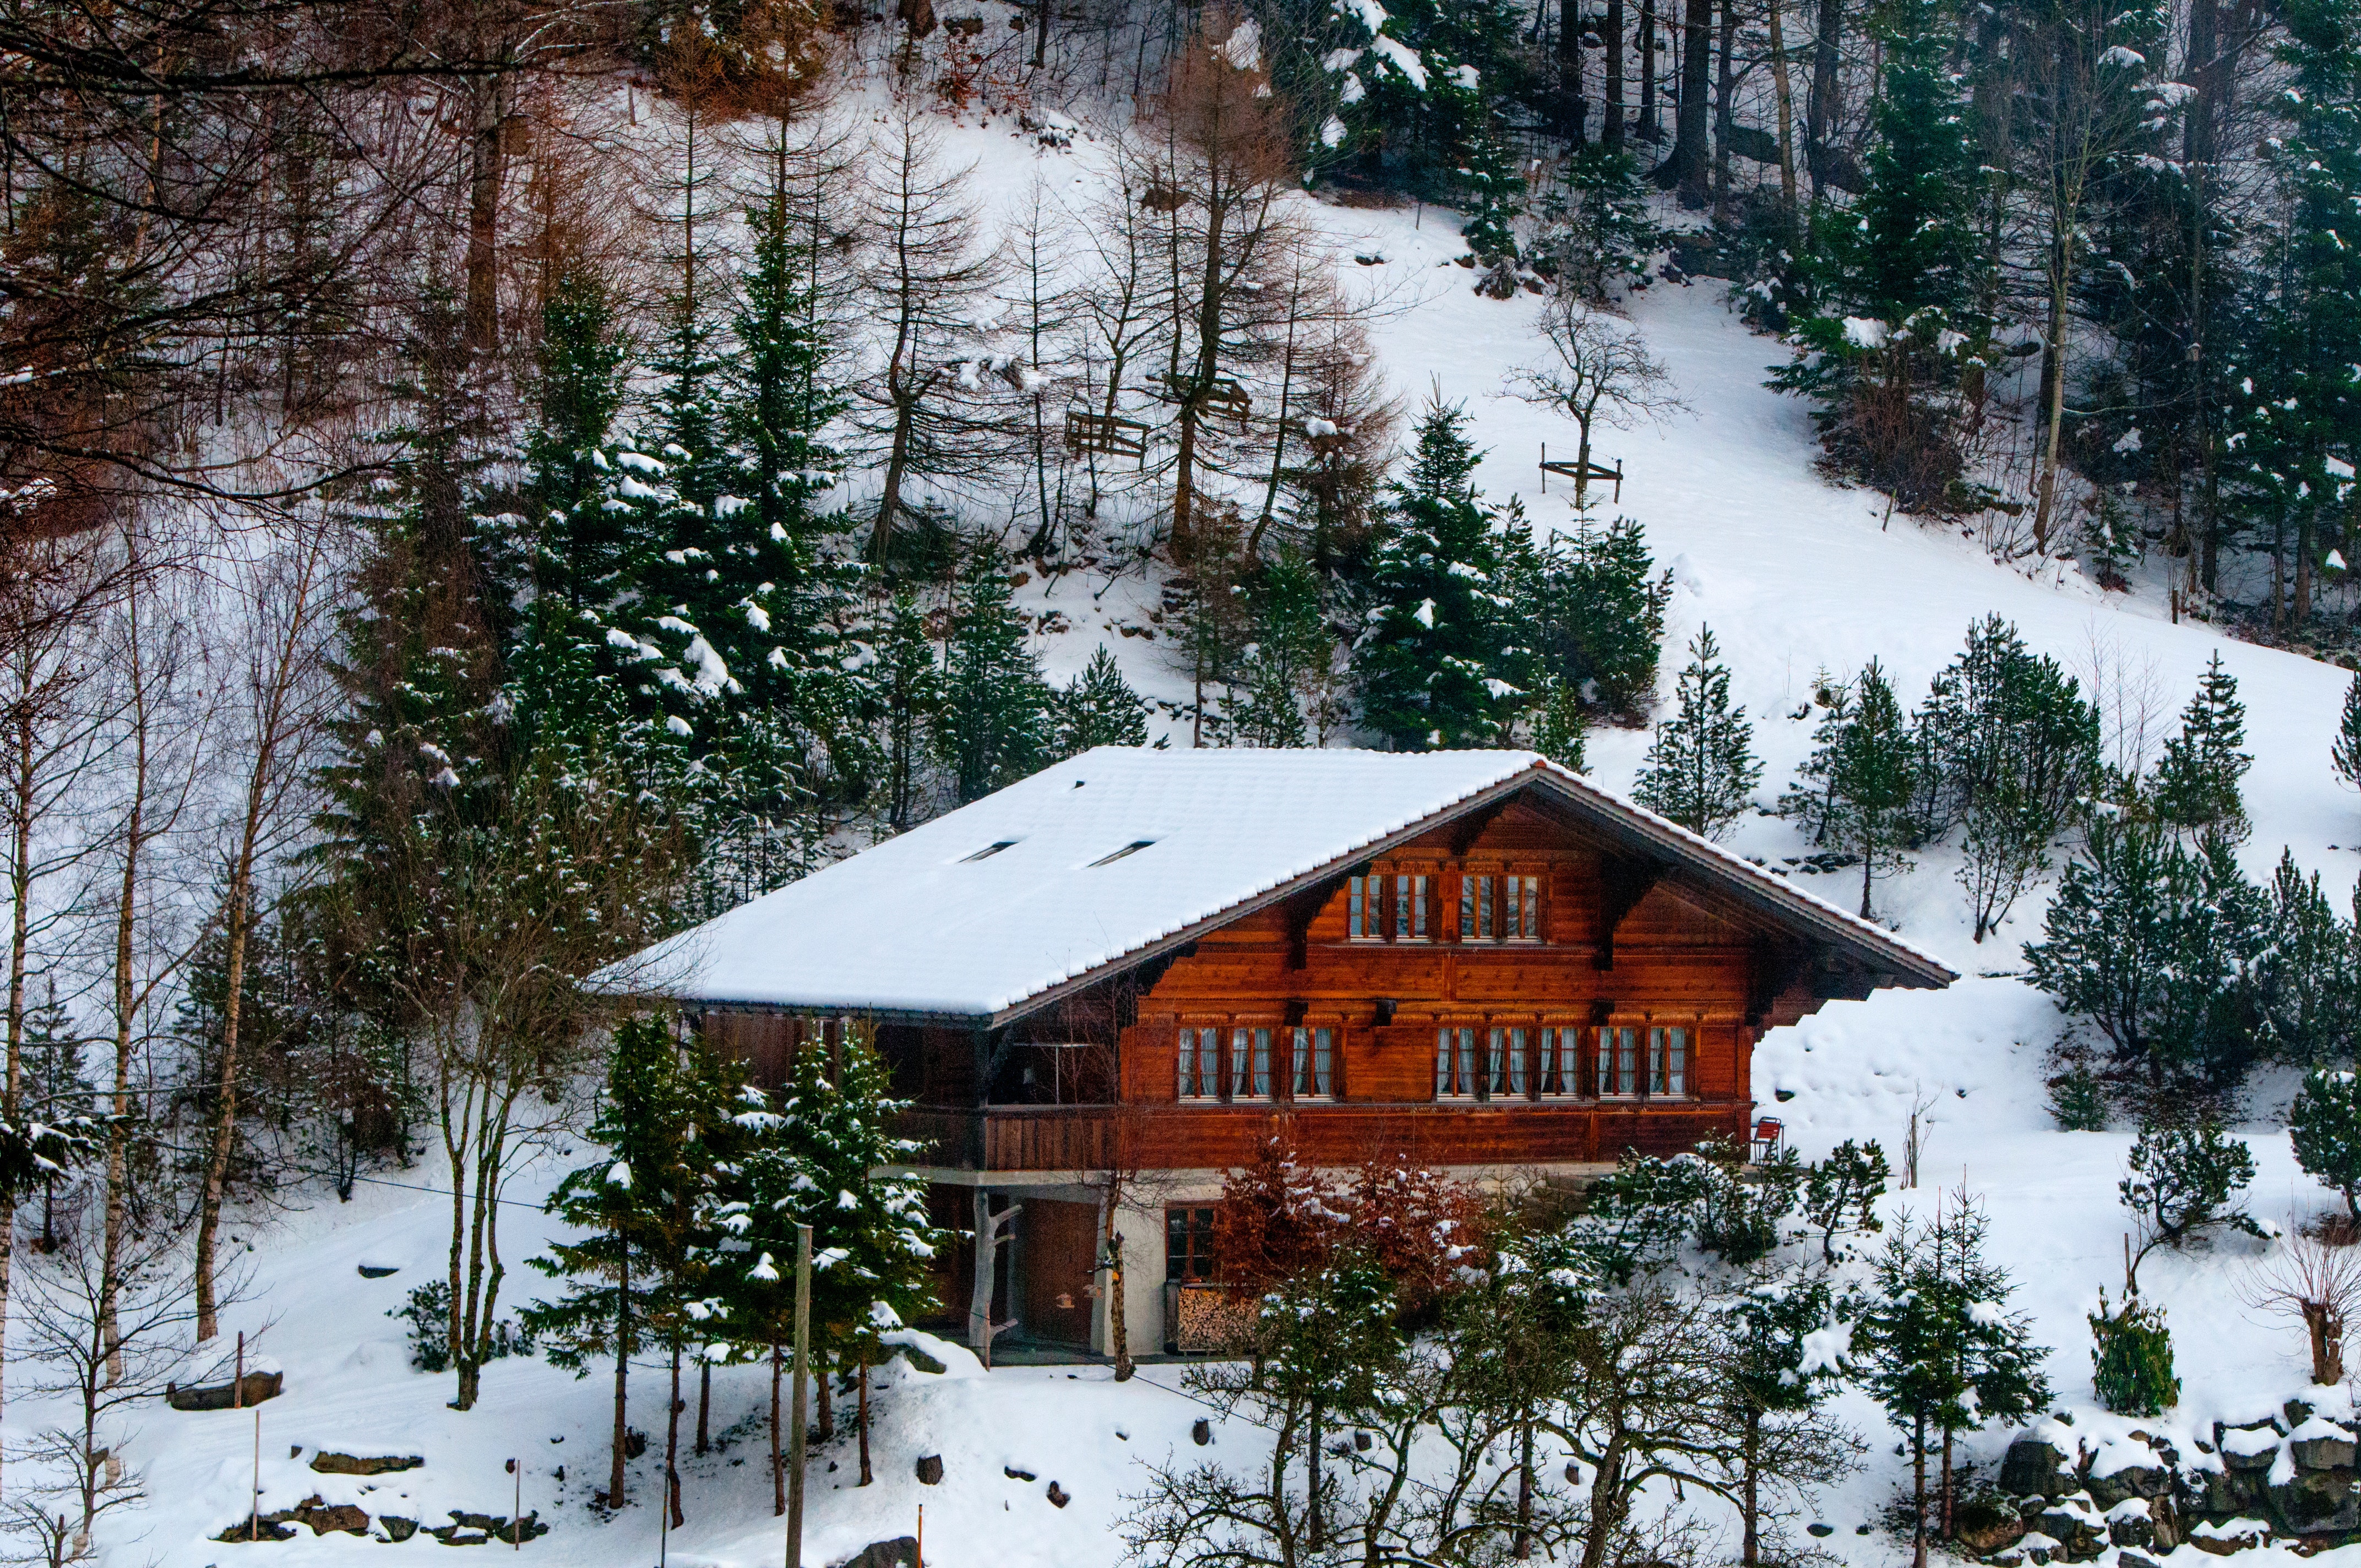 Photo of Chalet in the Forest, Chalet, Outdoors, Winter, Weather, HQ Photo